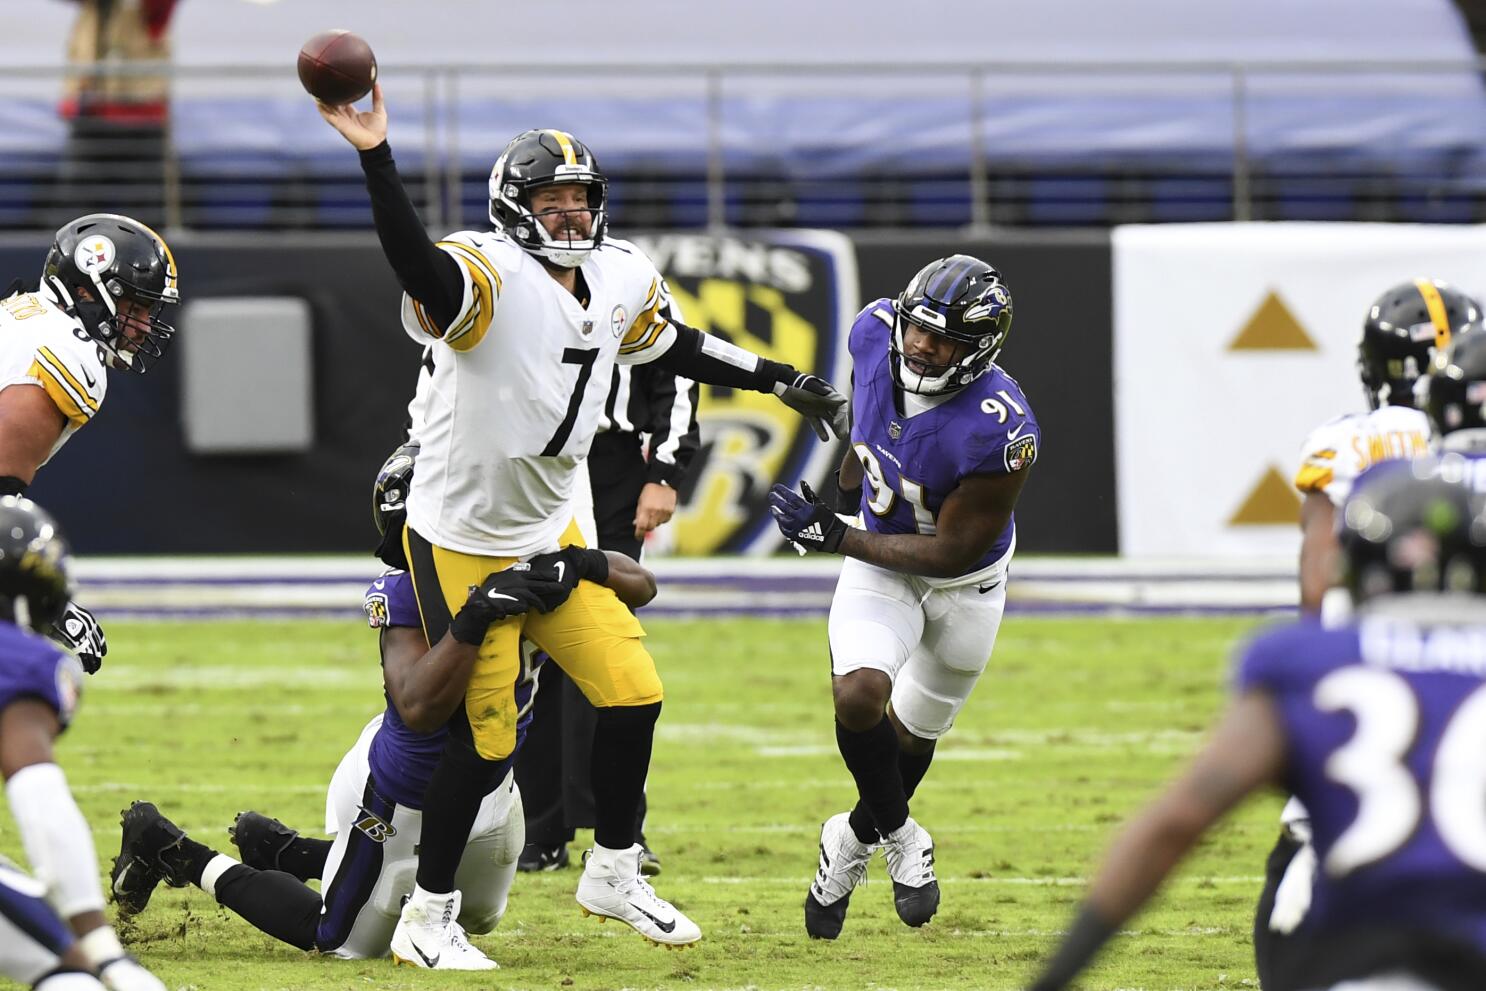 Ravens-Steelers Thanksgiving matchup postponed due to Covid-19